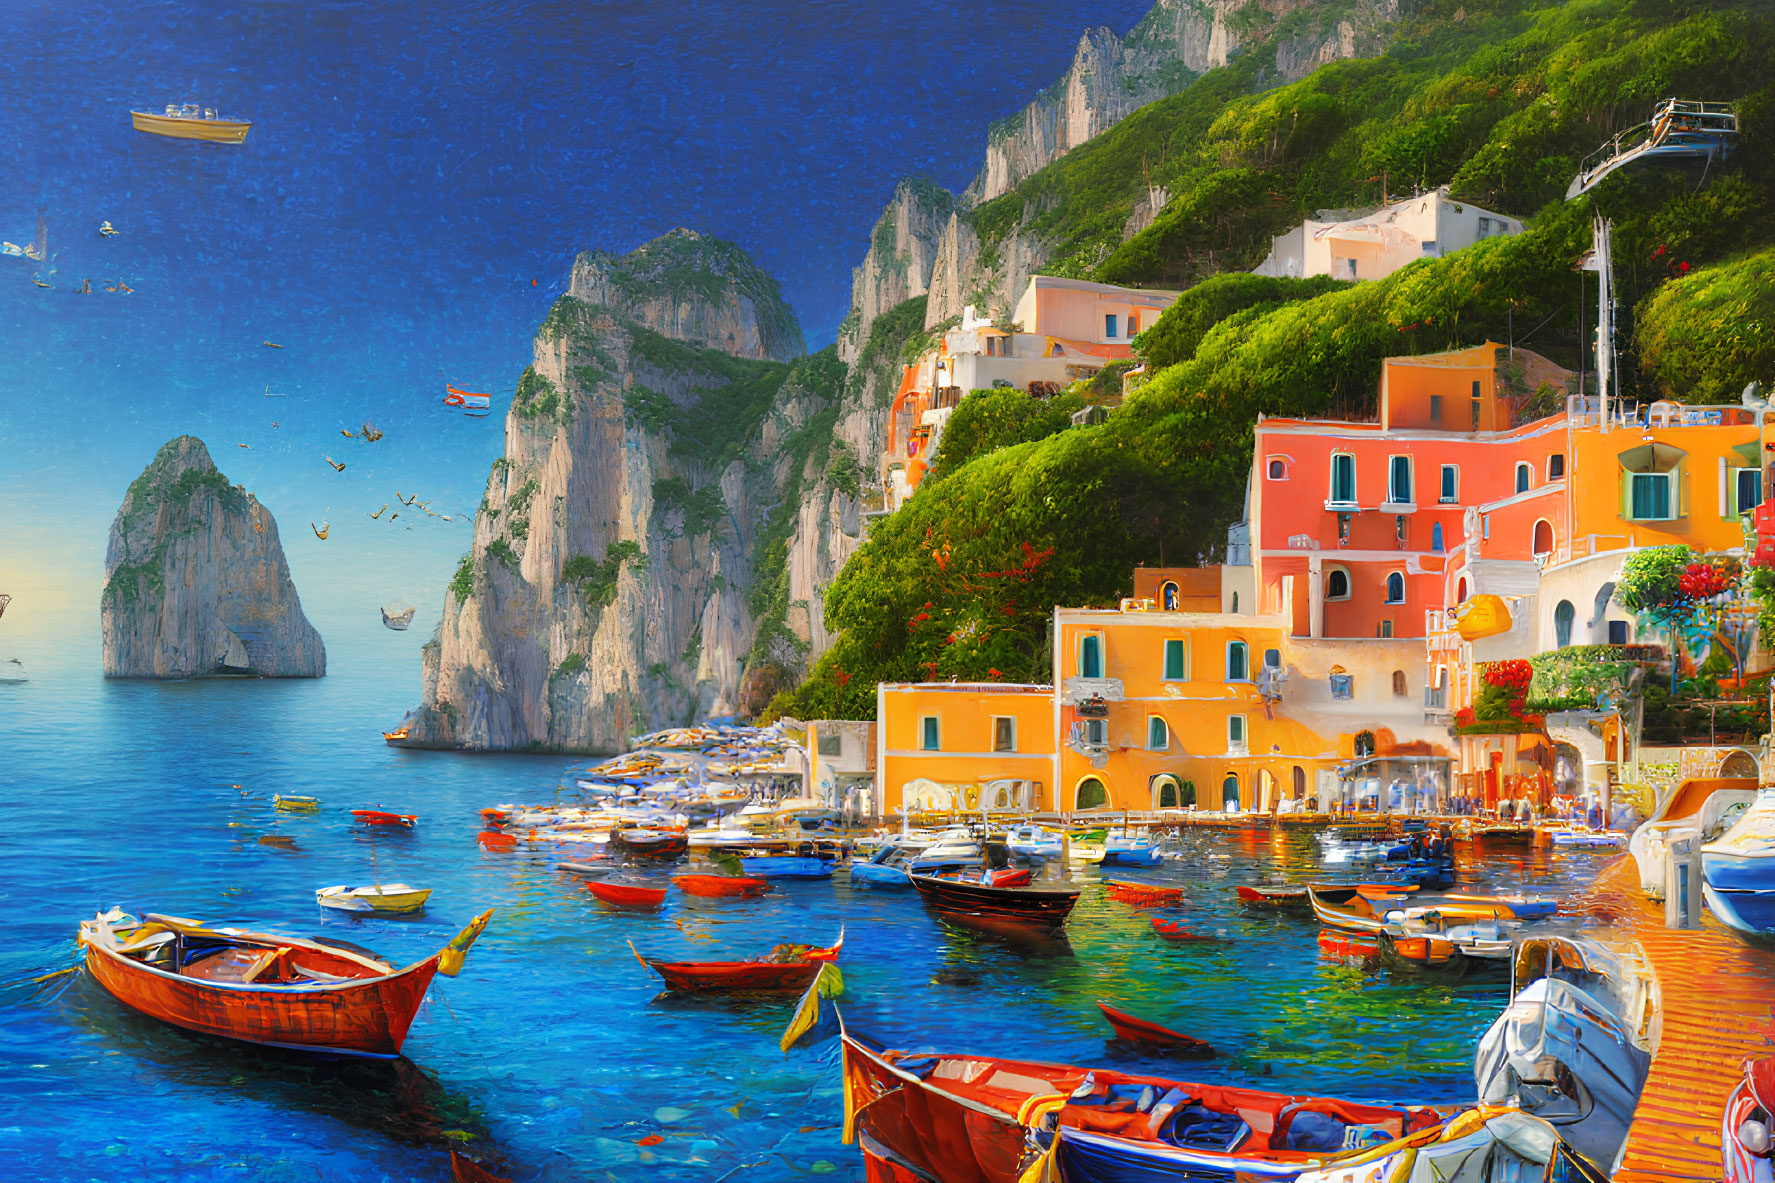 Vibrant seaside village with colorful boats and cliffs